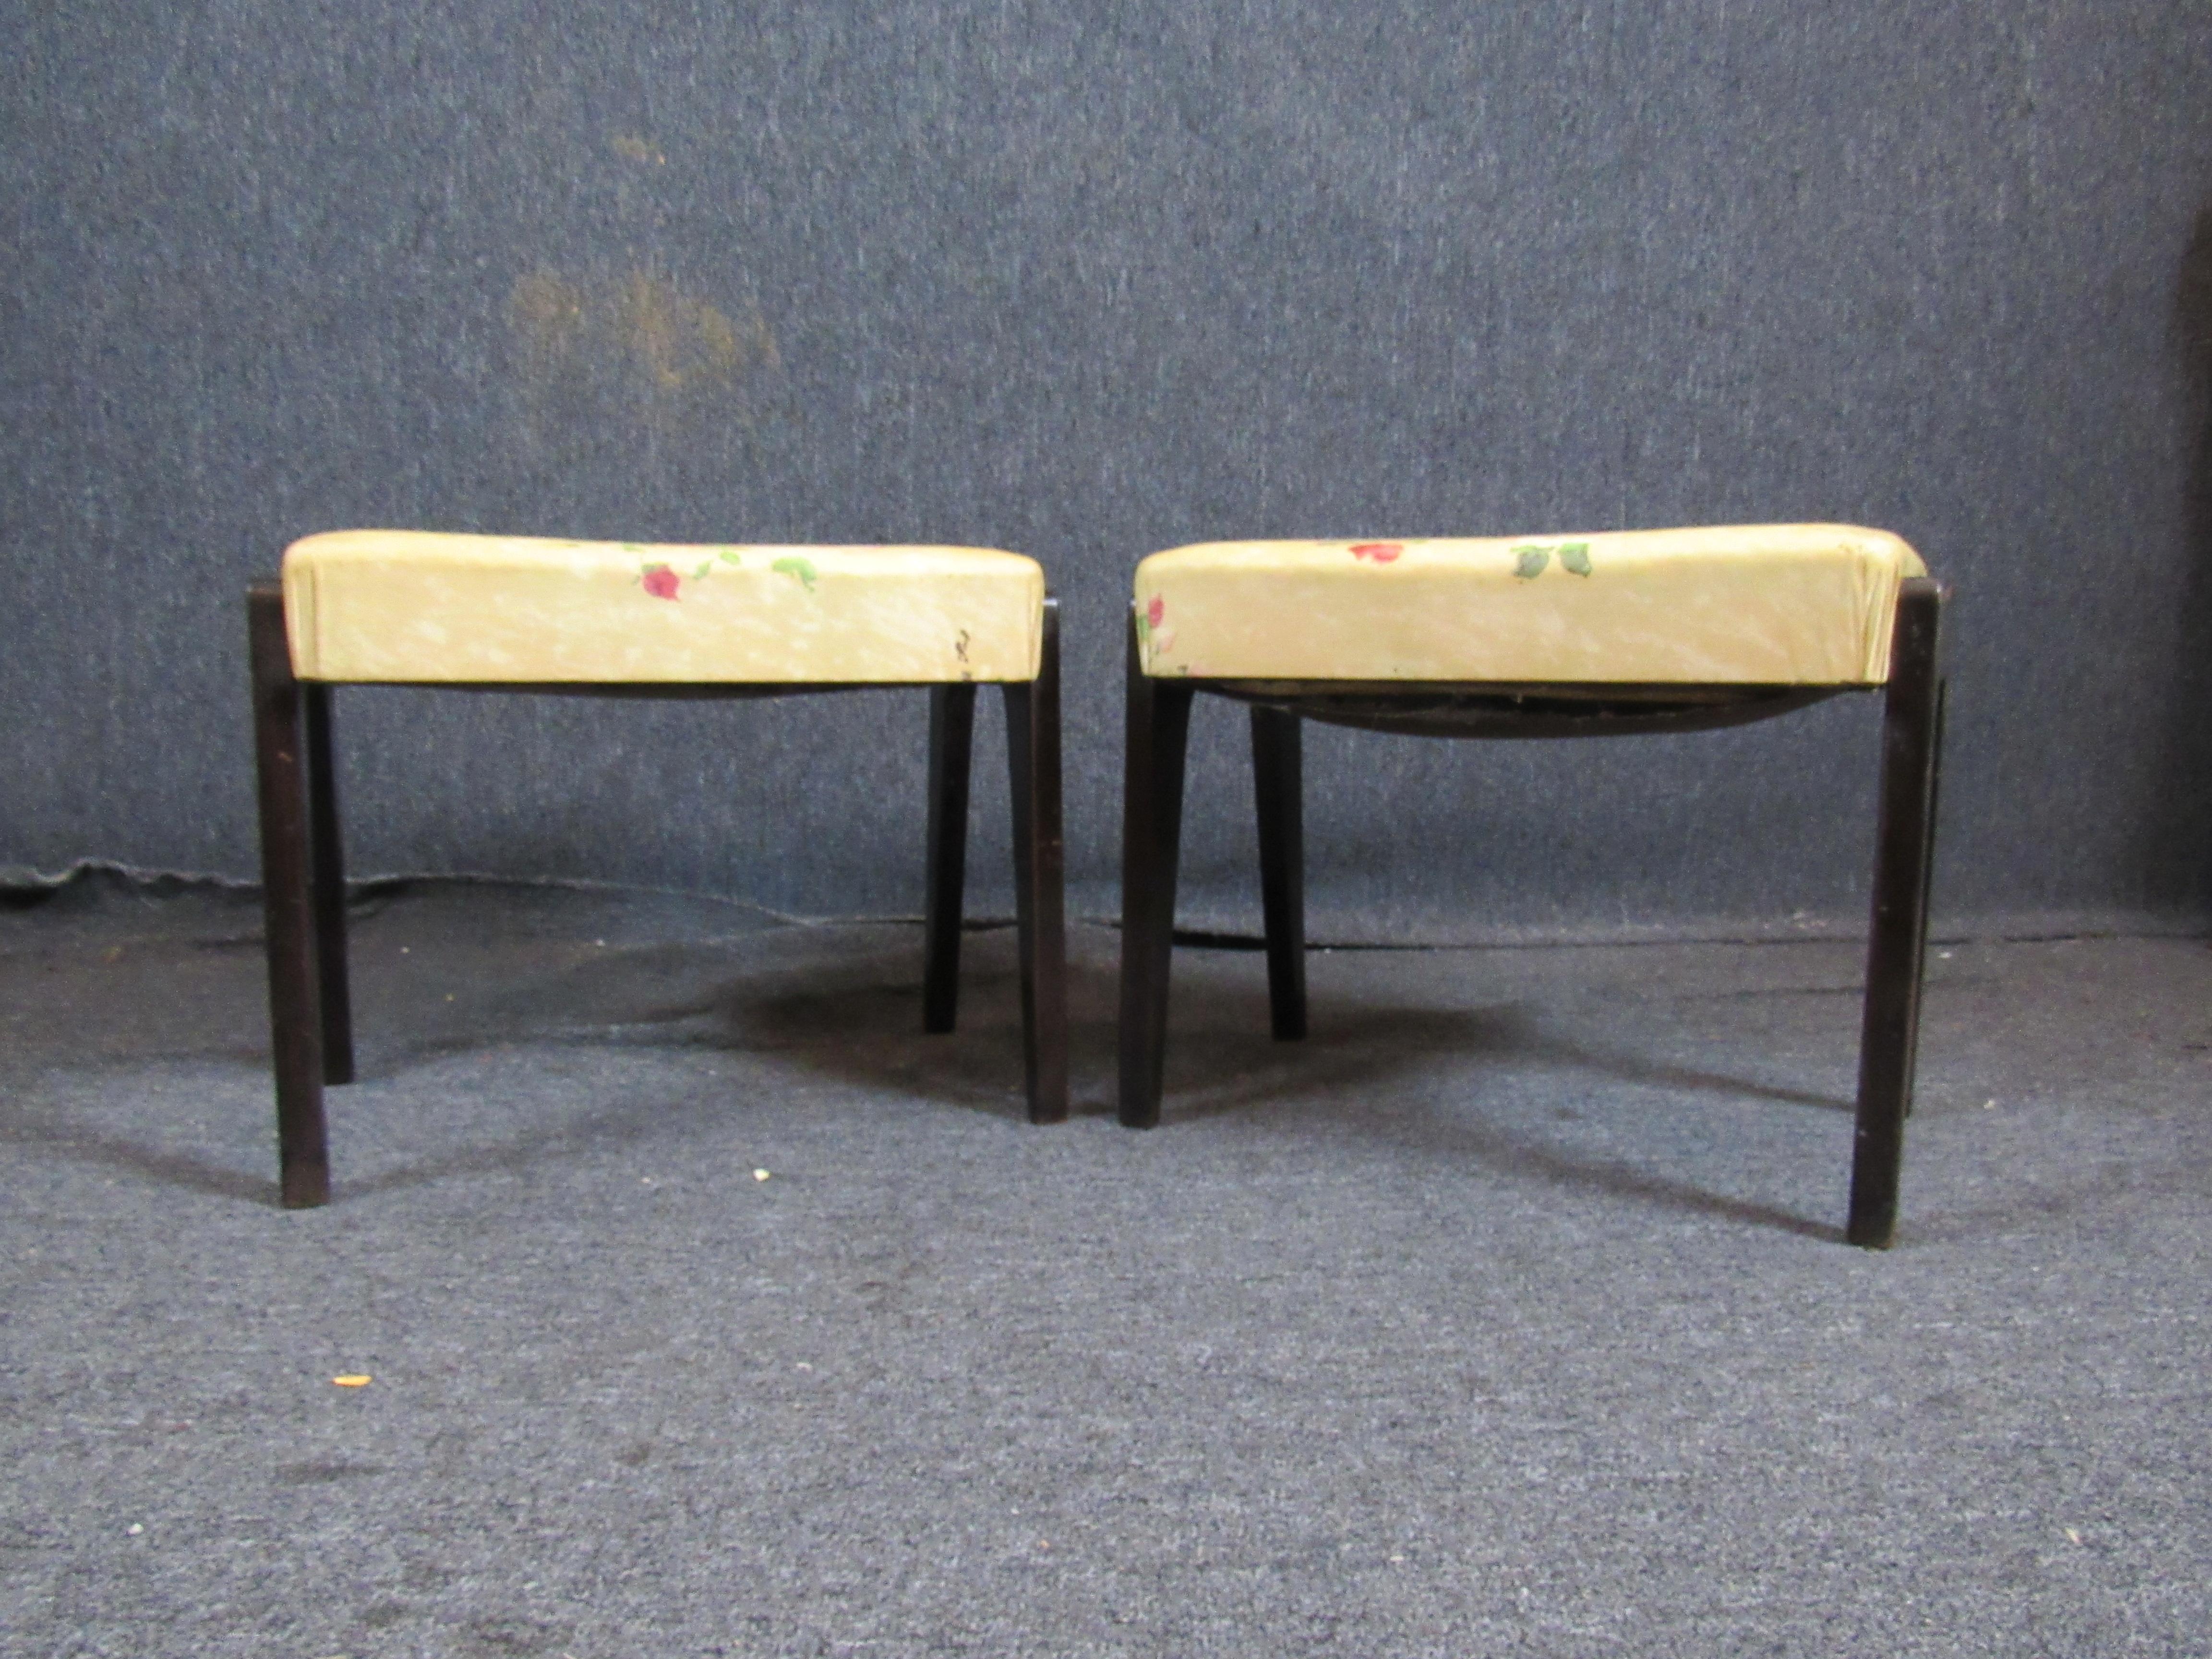 Charming little pair of beautiful vintage mid-century floral print ottomans. The bright, plush cushion accented by striking dark mahogany legs is sure to blend with a wide variety of decorating styles. Great as ottomans, or as children's stools.